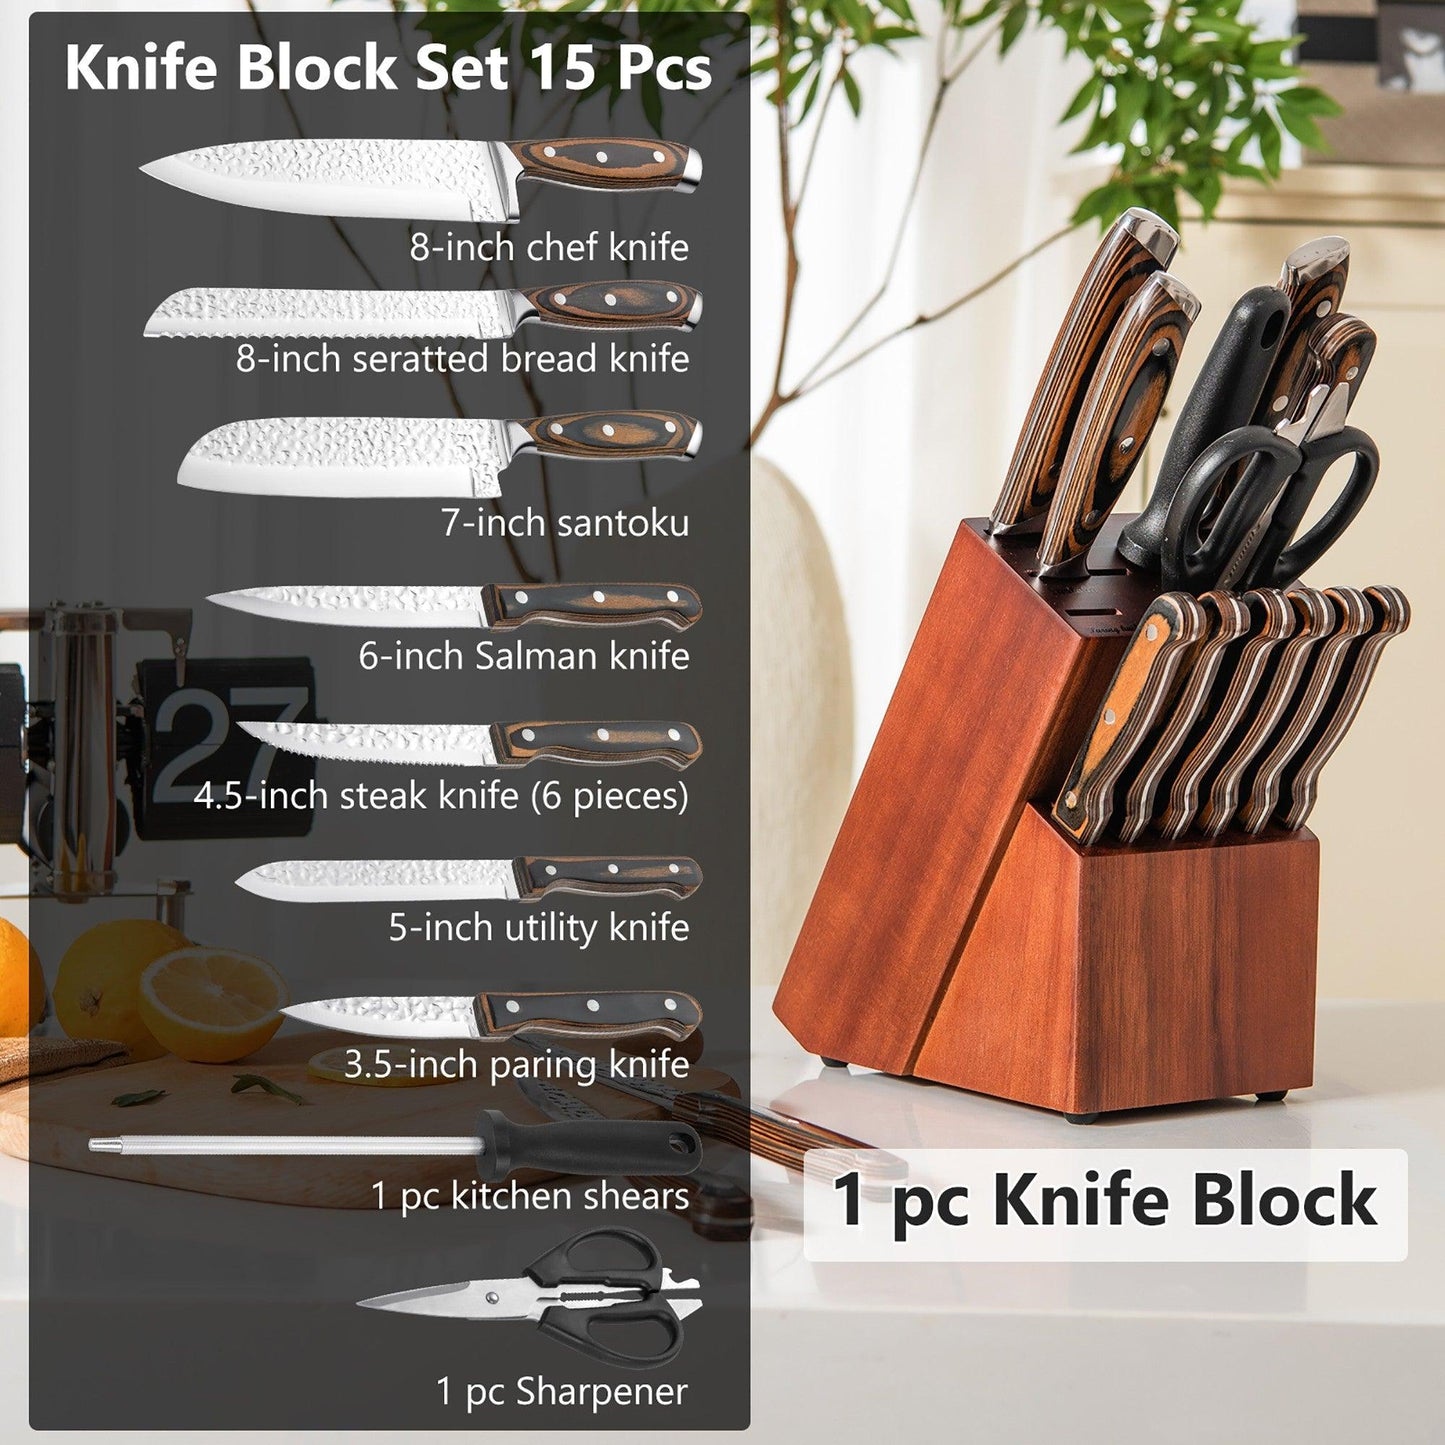 Costway 15 Pieces Stainless Steel Knife Block Set with Ergonomic Handle 60715928 - YOURISHOP.COM